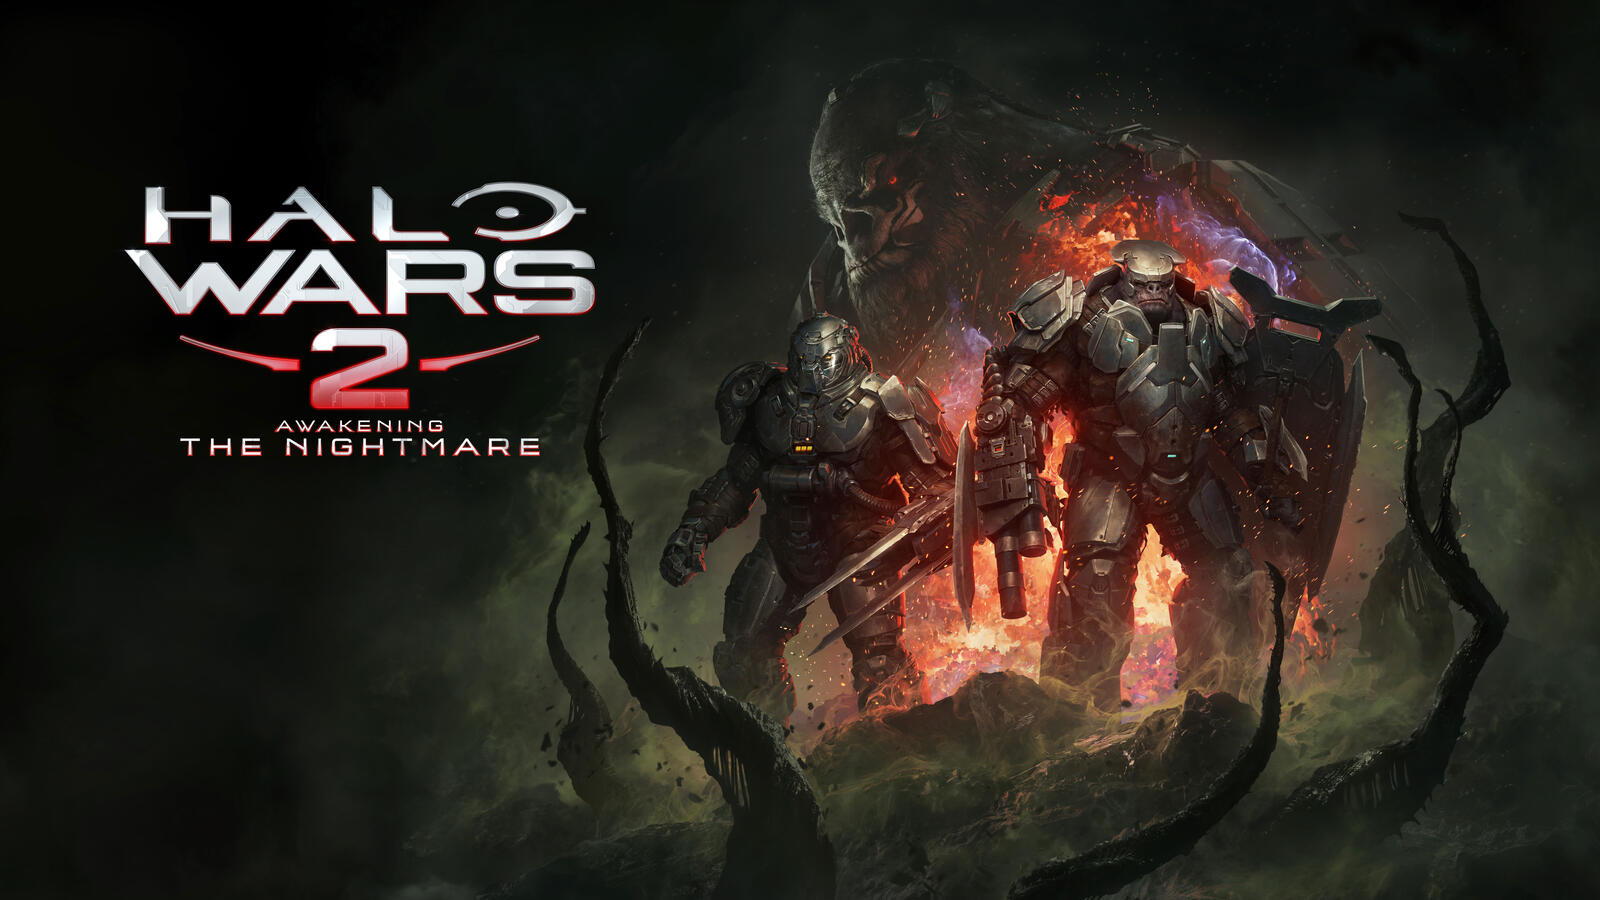 Wallpapers Halo Wars 2 2017 Games Pc Games on the desktop